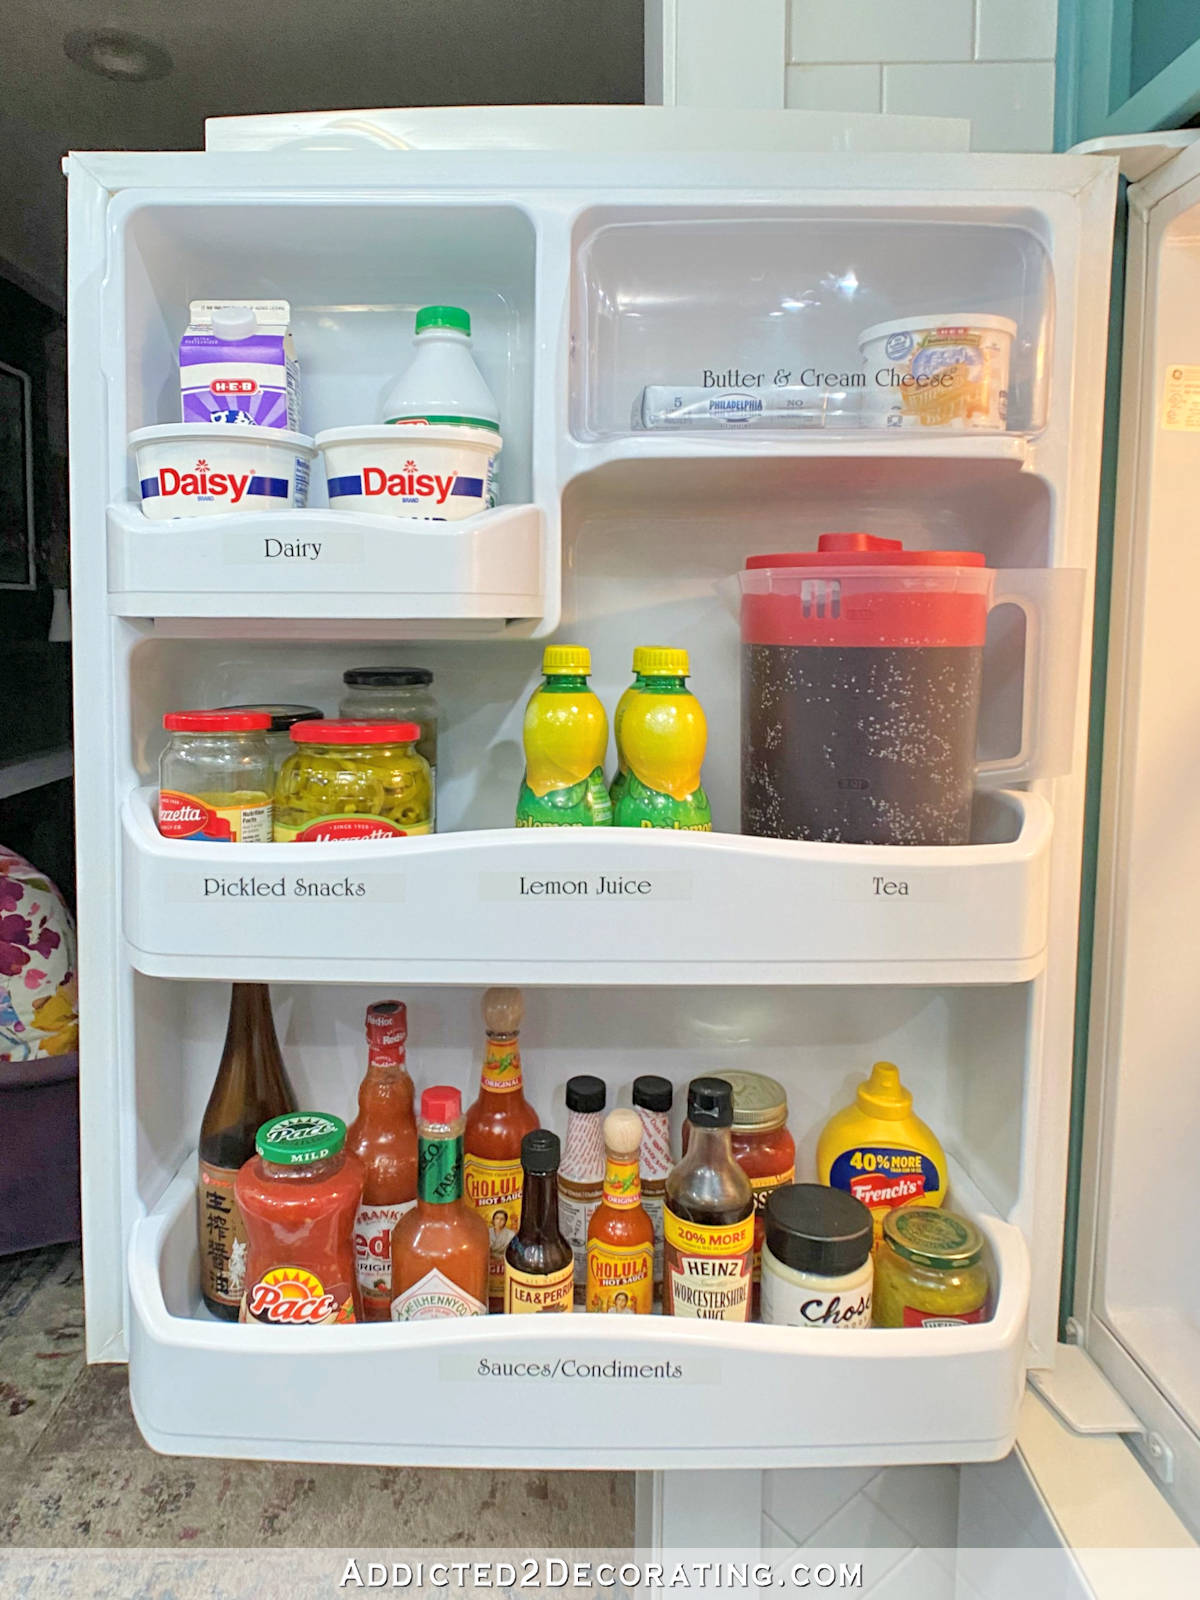 C.O.P. – Putting Systems In Place For Refrigerator And Freezer Organization